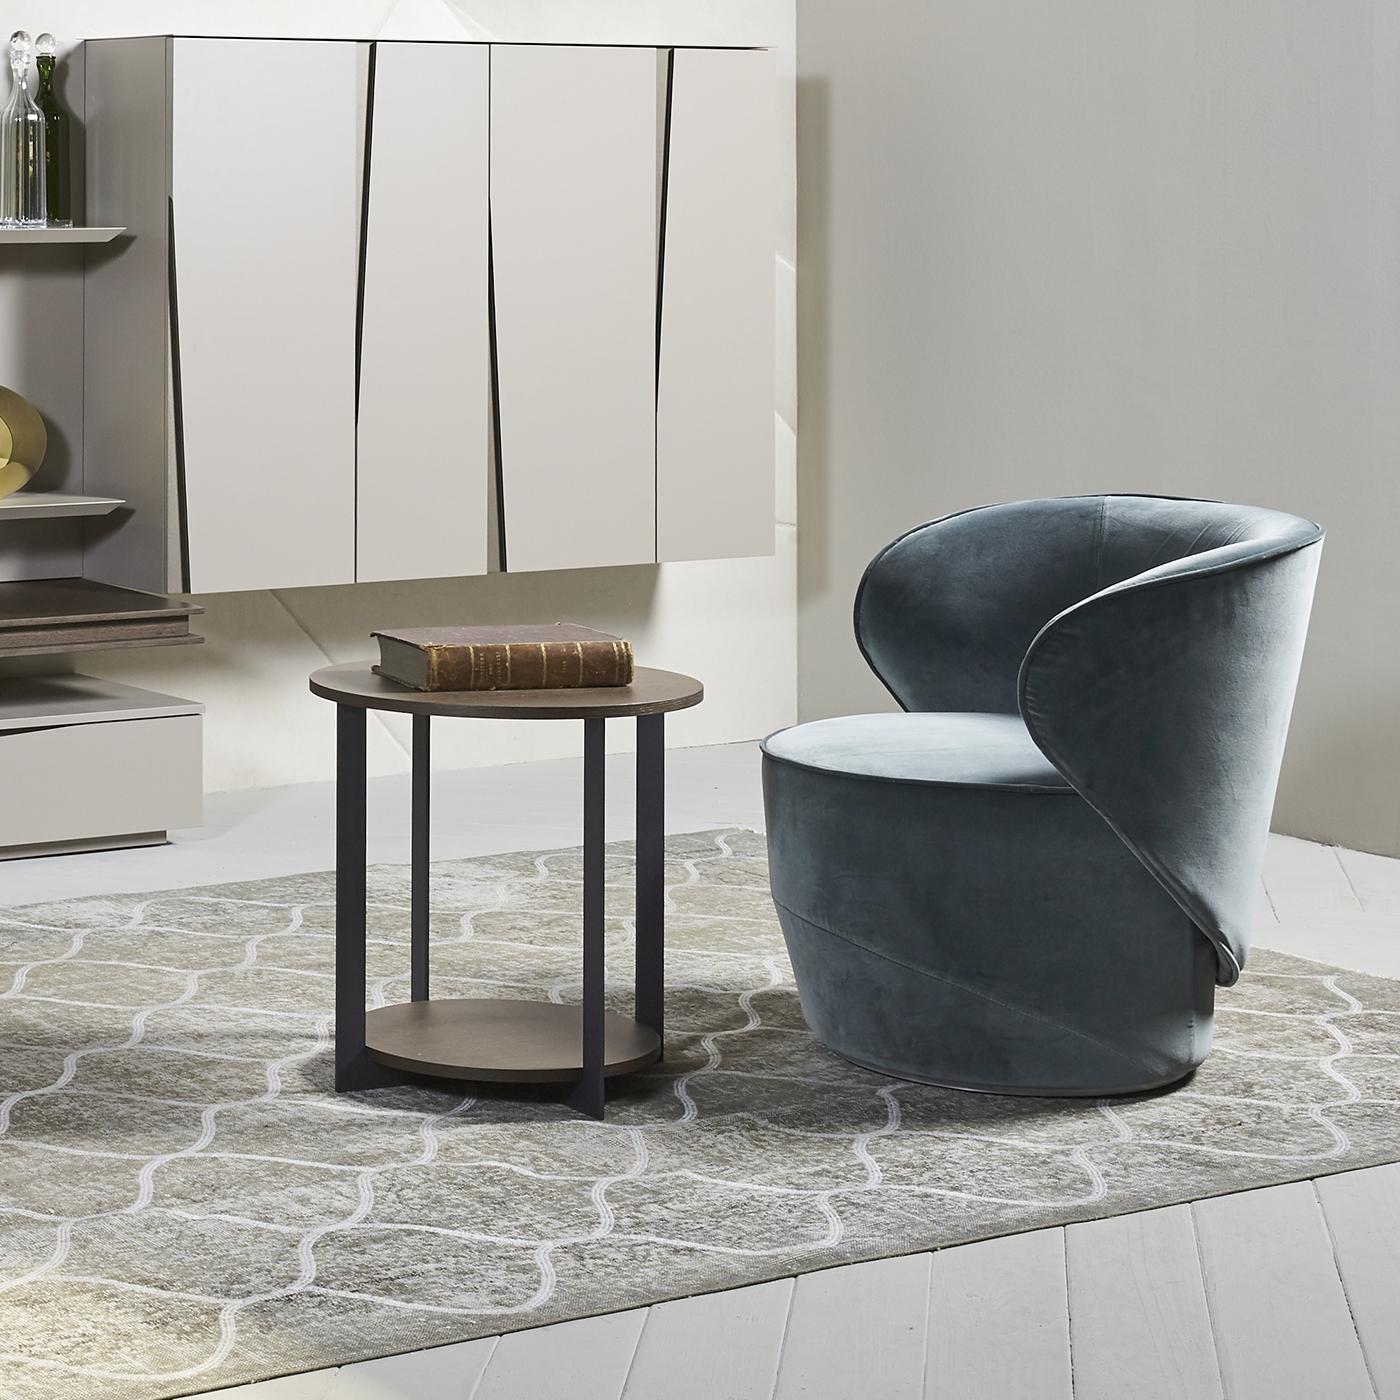 Unique and elegant, this swivel armchair boasts a round base enveloped by the armrest and back, that create a warm embrace enhanced by the velvet upholstery in peacock blue. This versatile piece will infuse comfort and sophistication in a modern